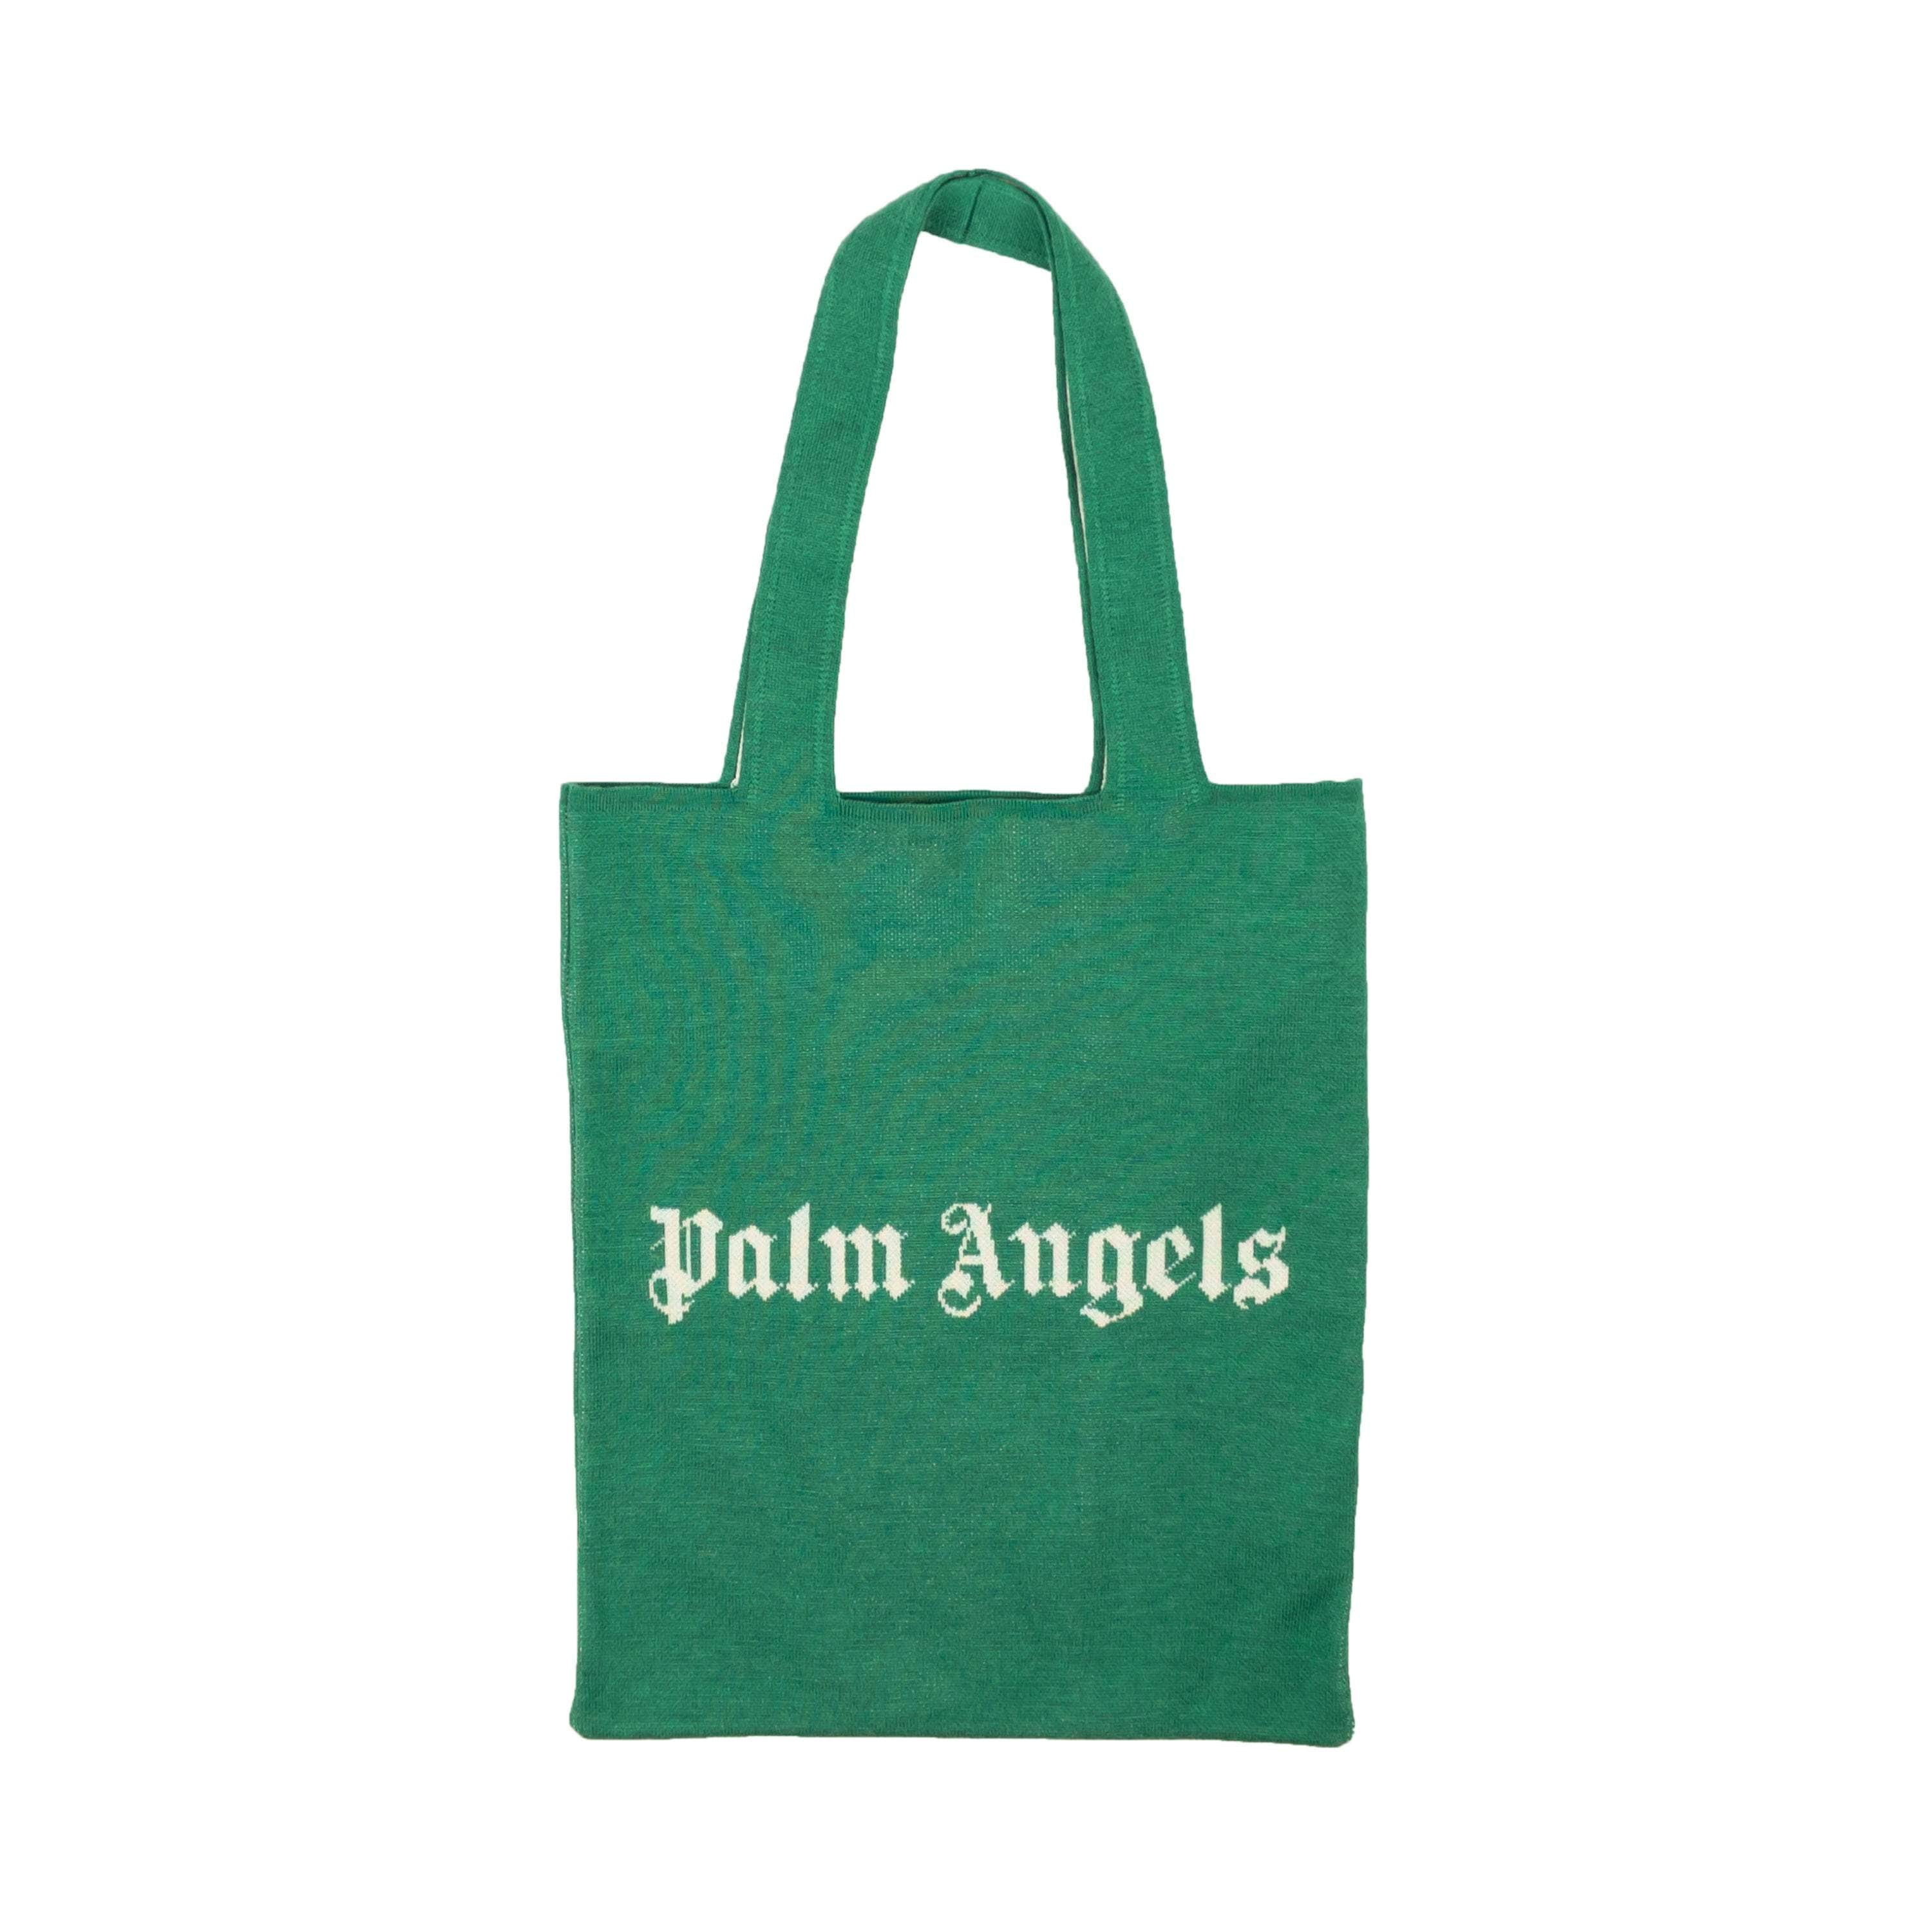 Palm Angels 500-750, channelenable-all, chicmi, couponcollection, gender-womens, main-handbags, mens-tote-bags, palm-angels, size-os OS Green PA Knit Wool Blend Shopper Tote Bag PLM-XBGS-0002/OS PLM-XBGS-0002/OS